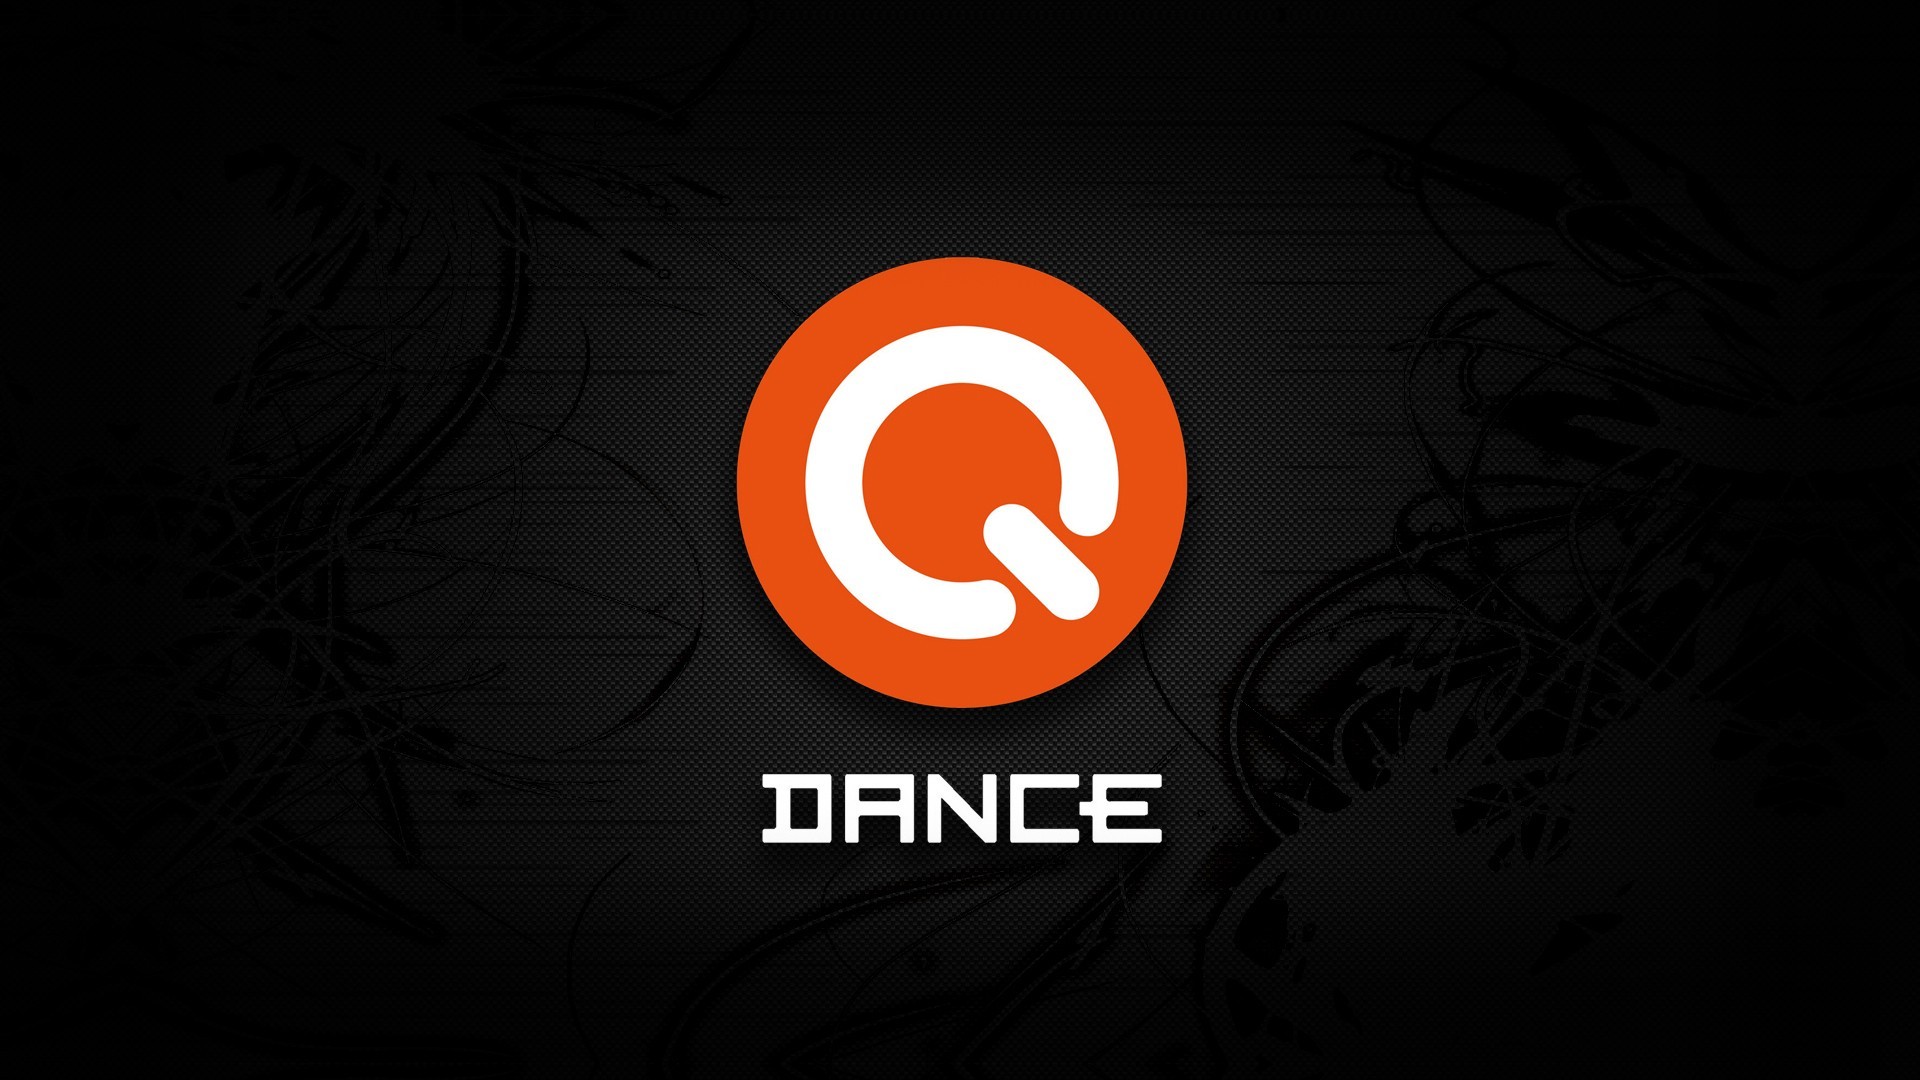 Q-dance Wallpaper - Q Dance Wallpaper Hd , HD Wallpaper & Backgrounds